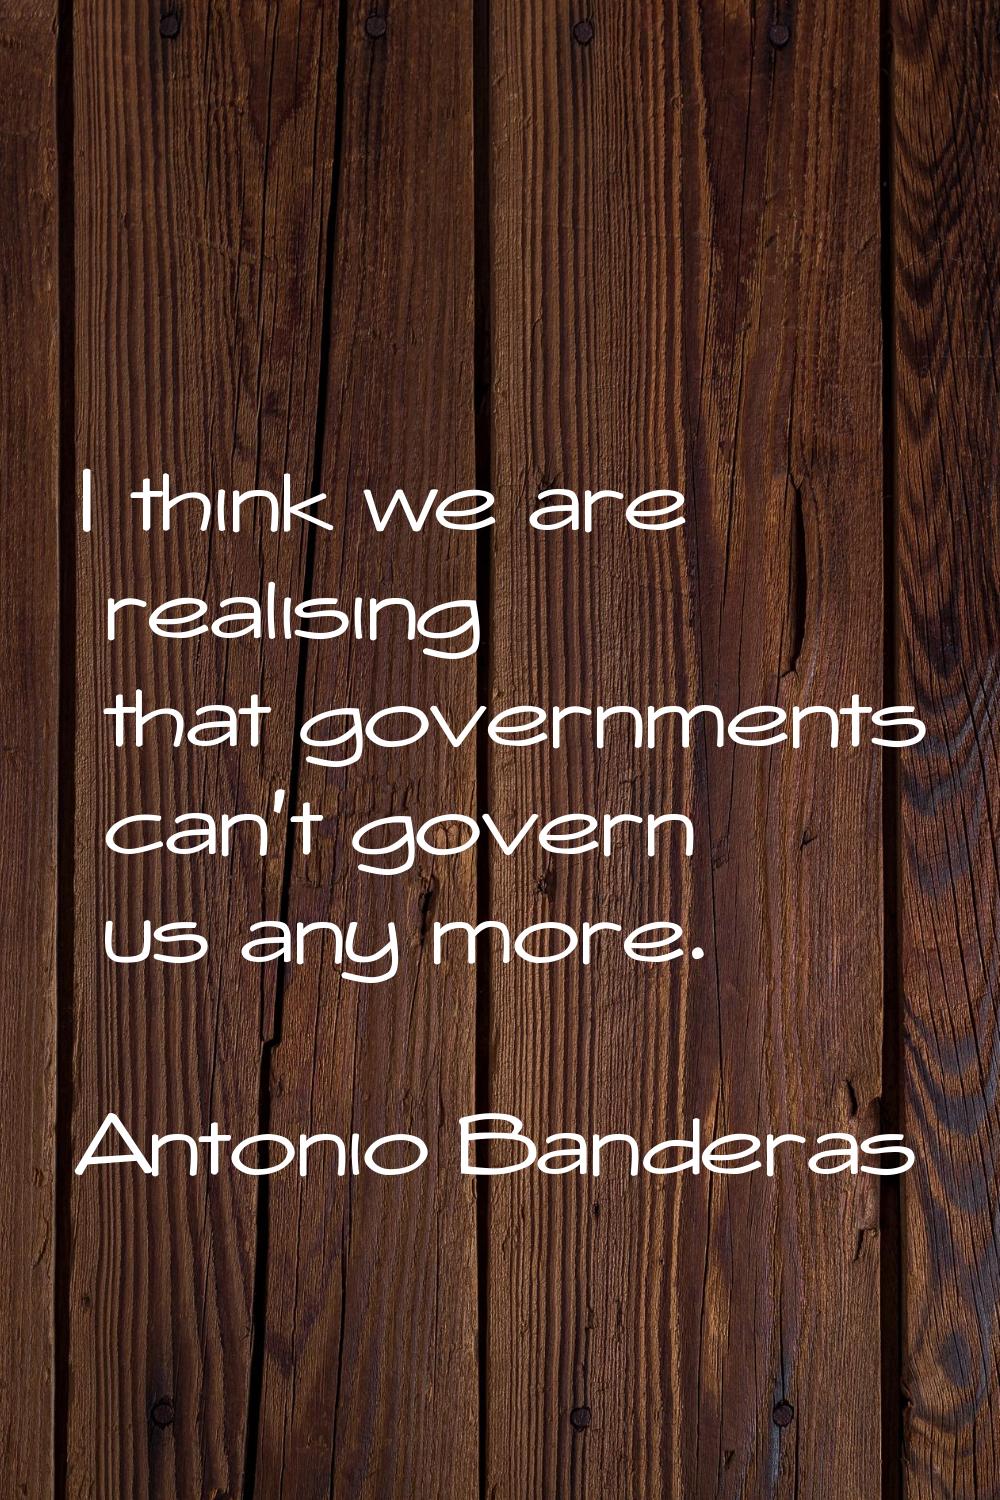 I think we are realising that governments can't govern us any more.